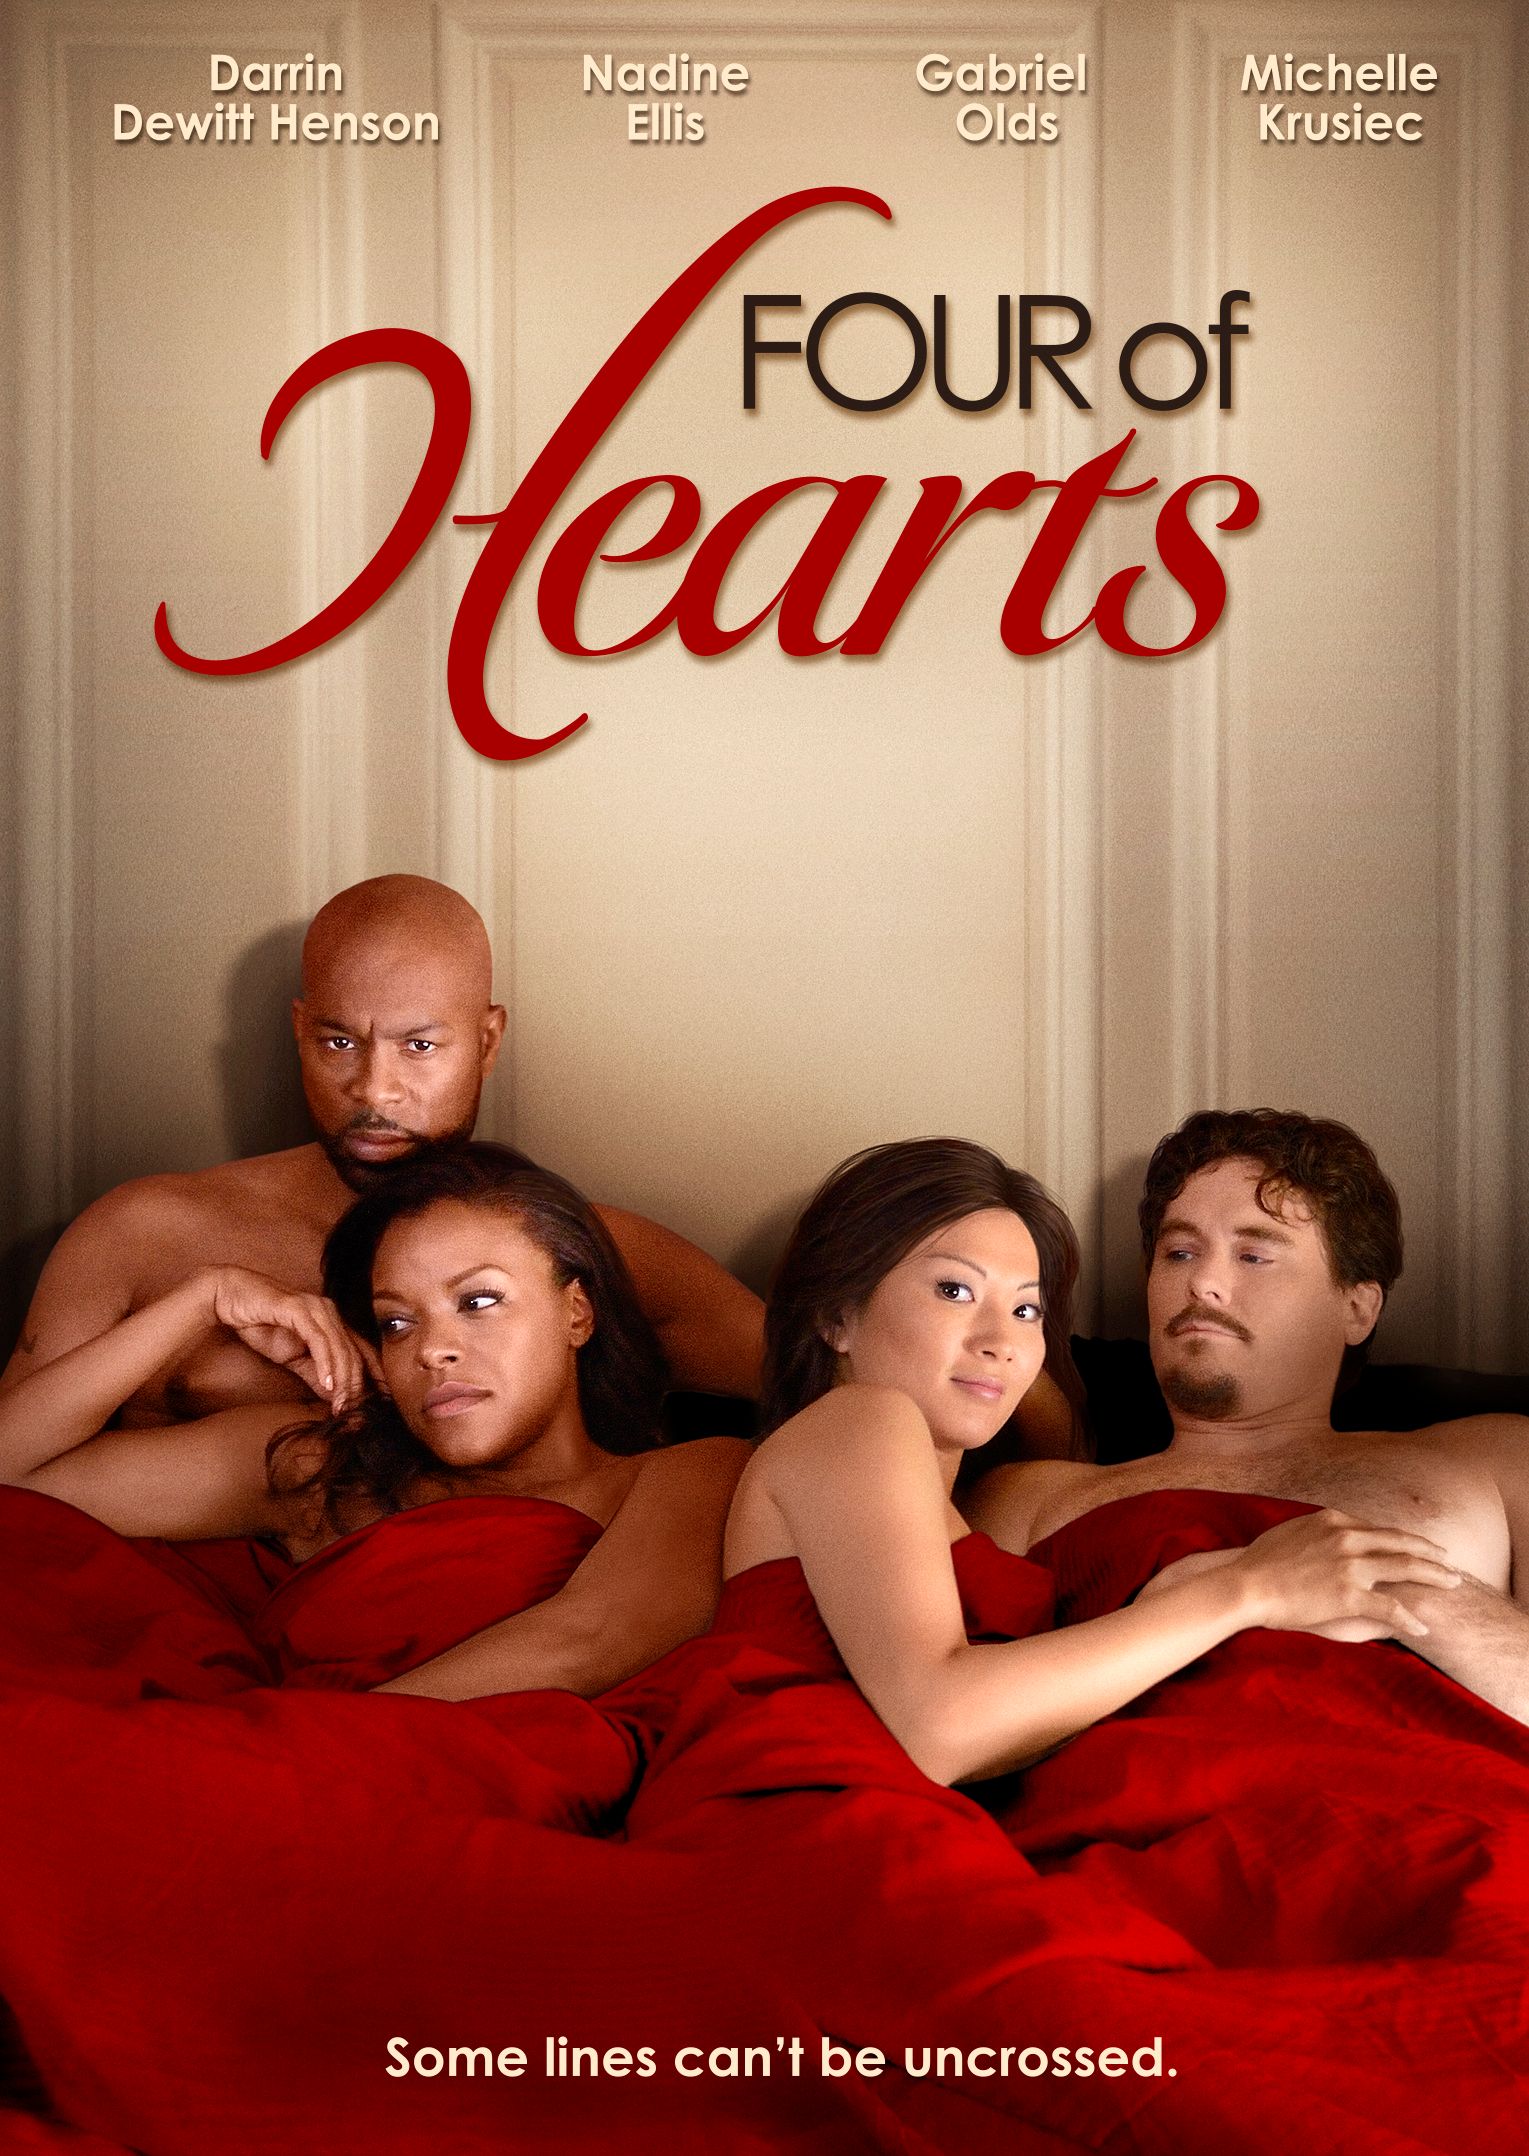 Four of Hearts Poster